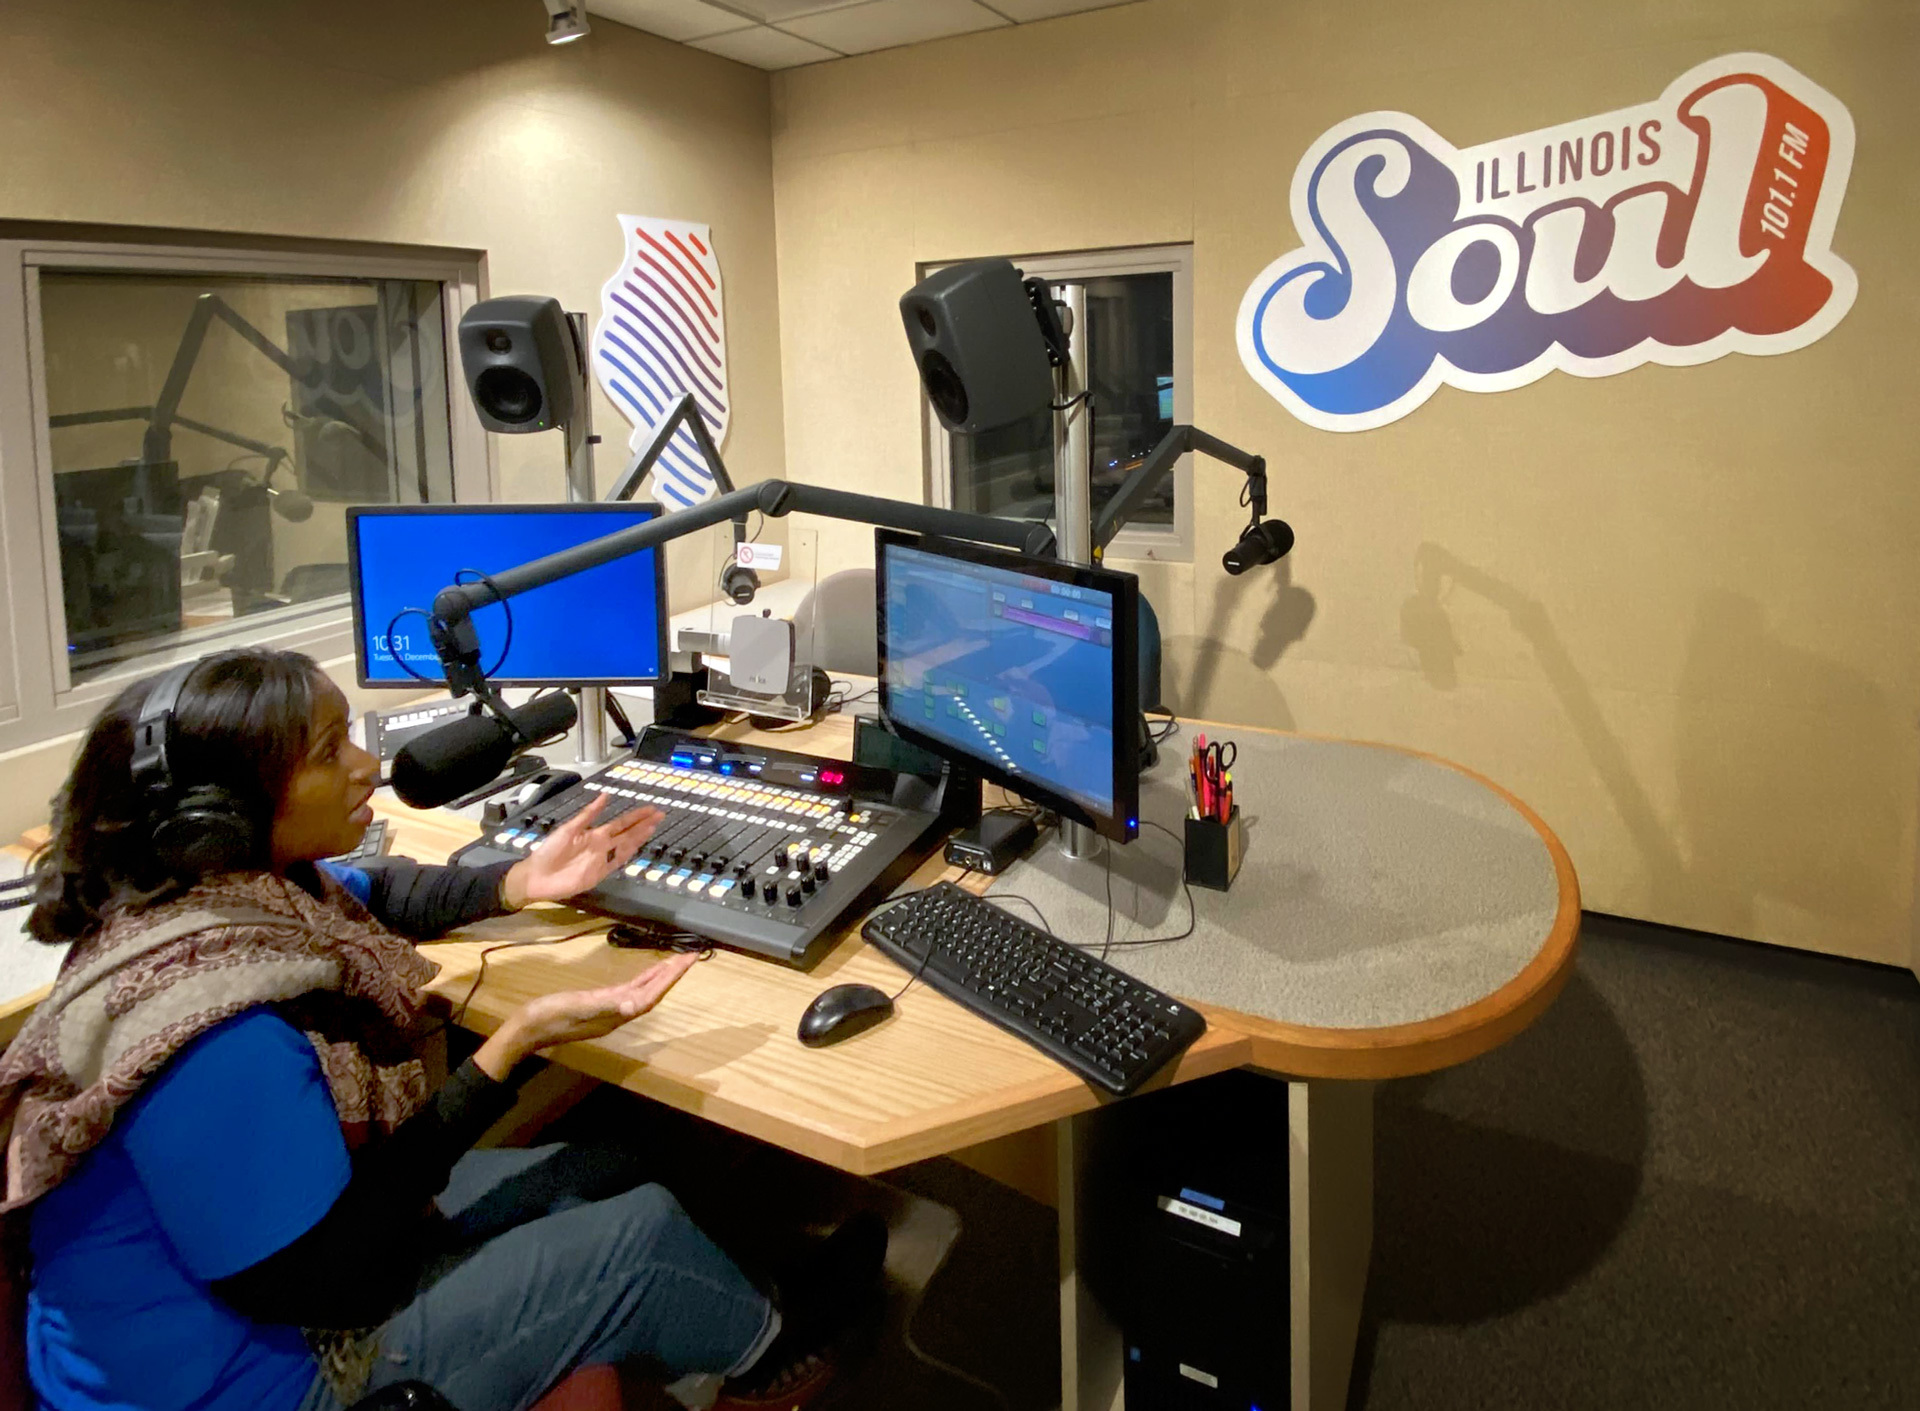 A Black woman sits behind a microphone in a radio studio, with two computer moniters is front of her. There is a sign that says Illinois Soul on the wall.